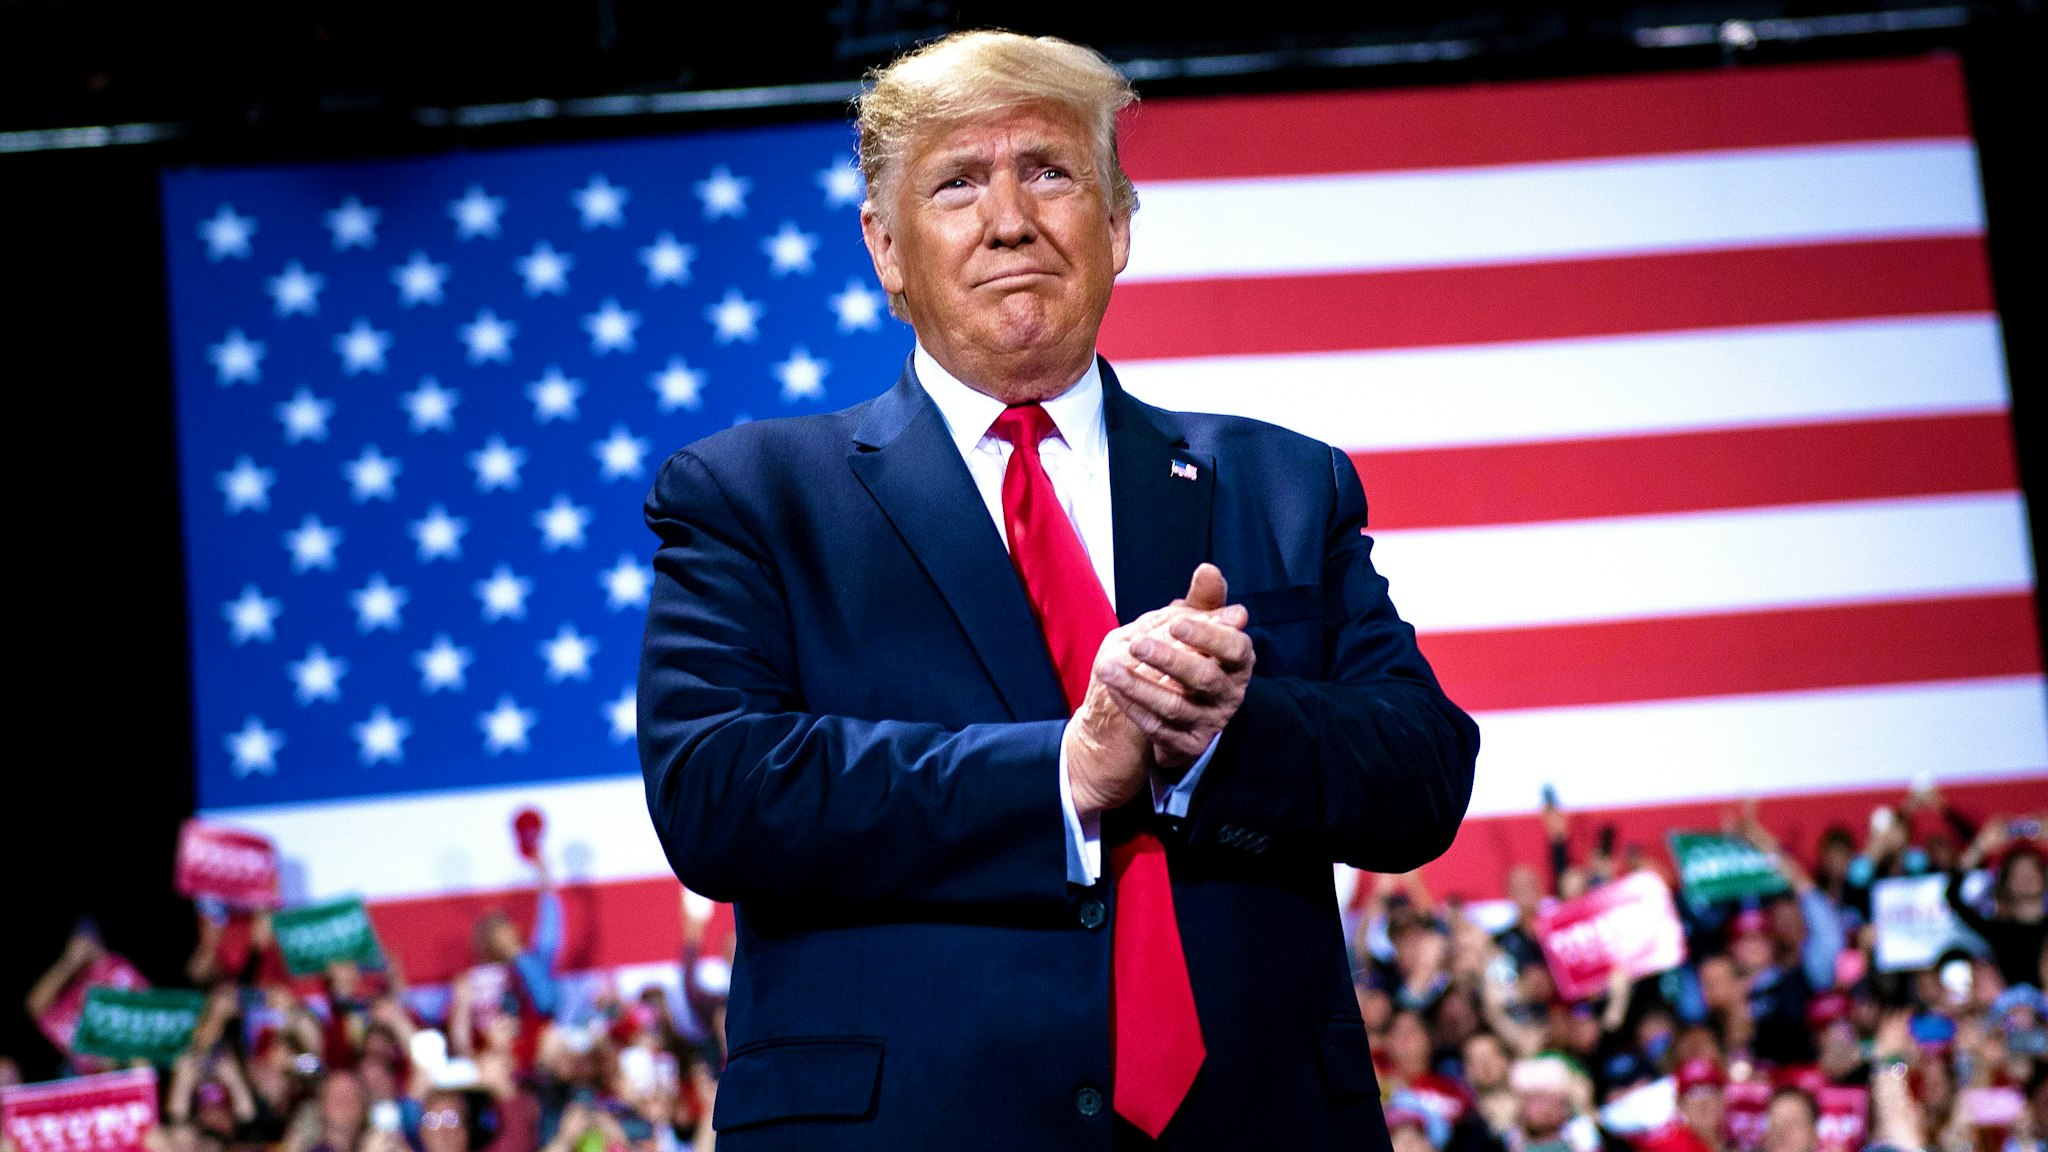 US President Donald Trump gestures during a Keep America Great Rally at Kellogg Arena December 18, 2019, in Battle Creek, Michigan.